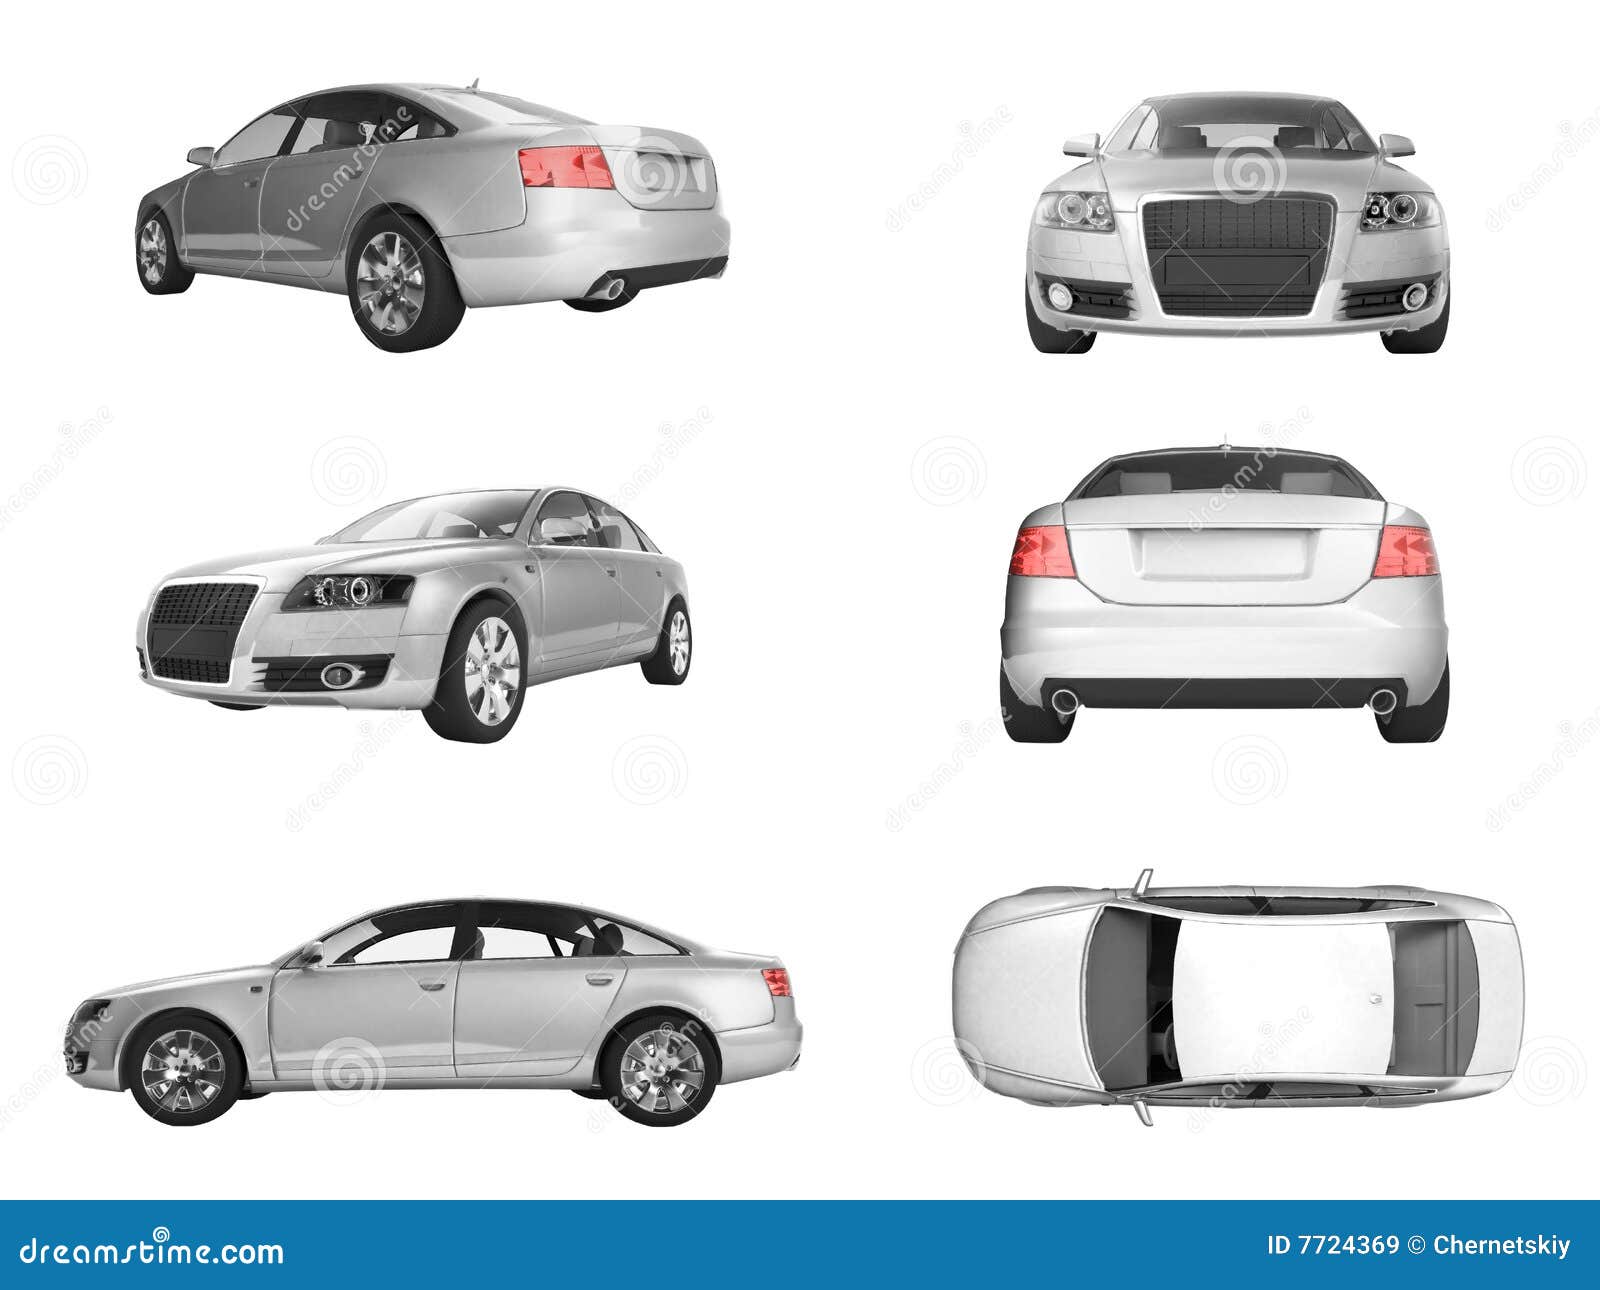 six different views of 3d image of silver car